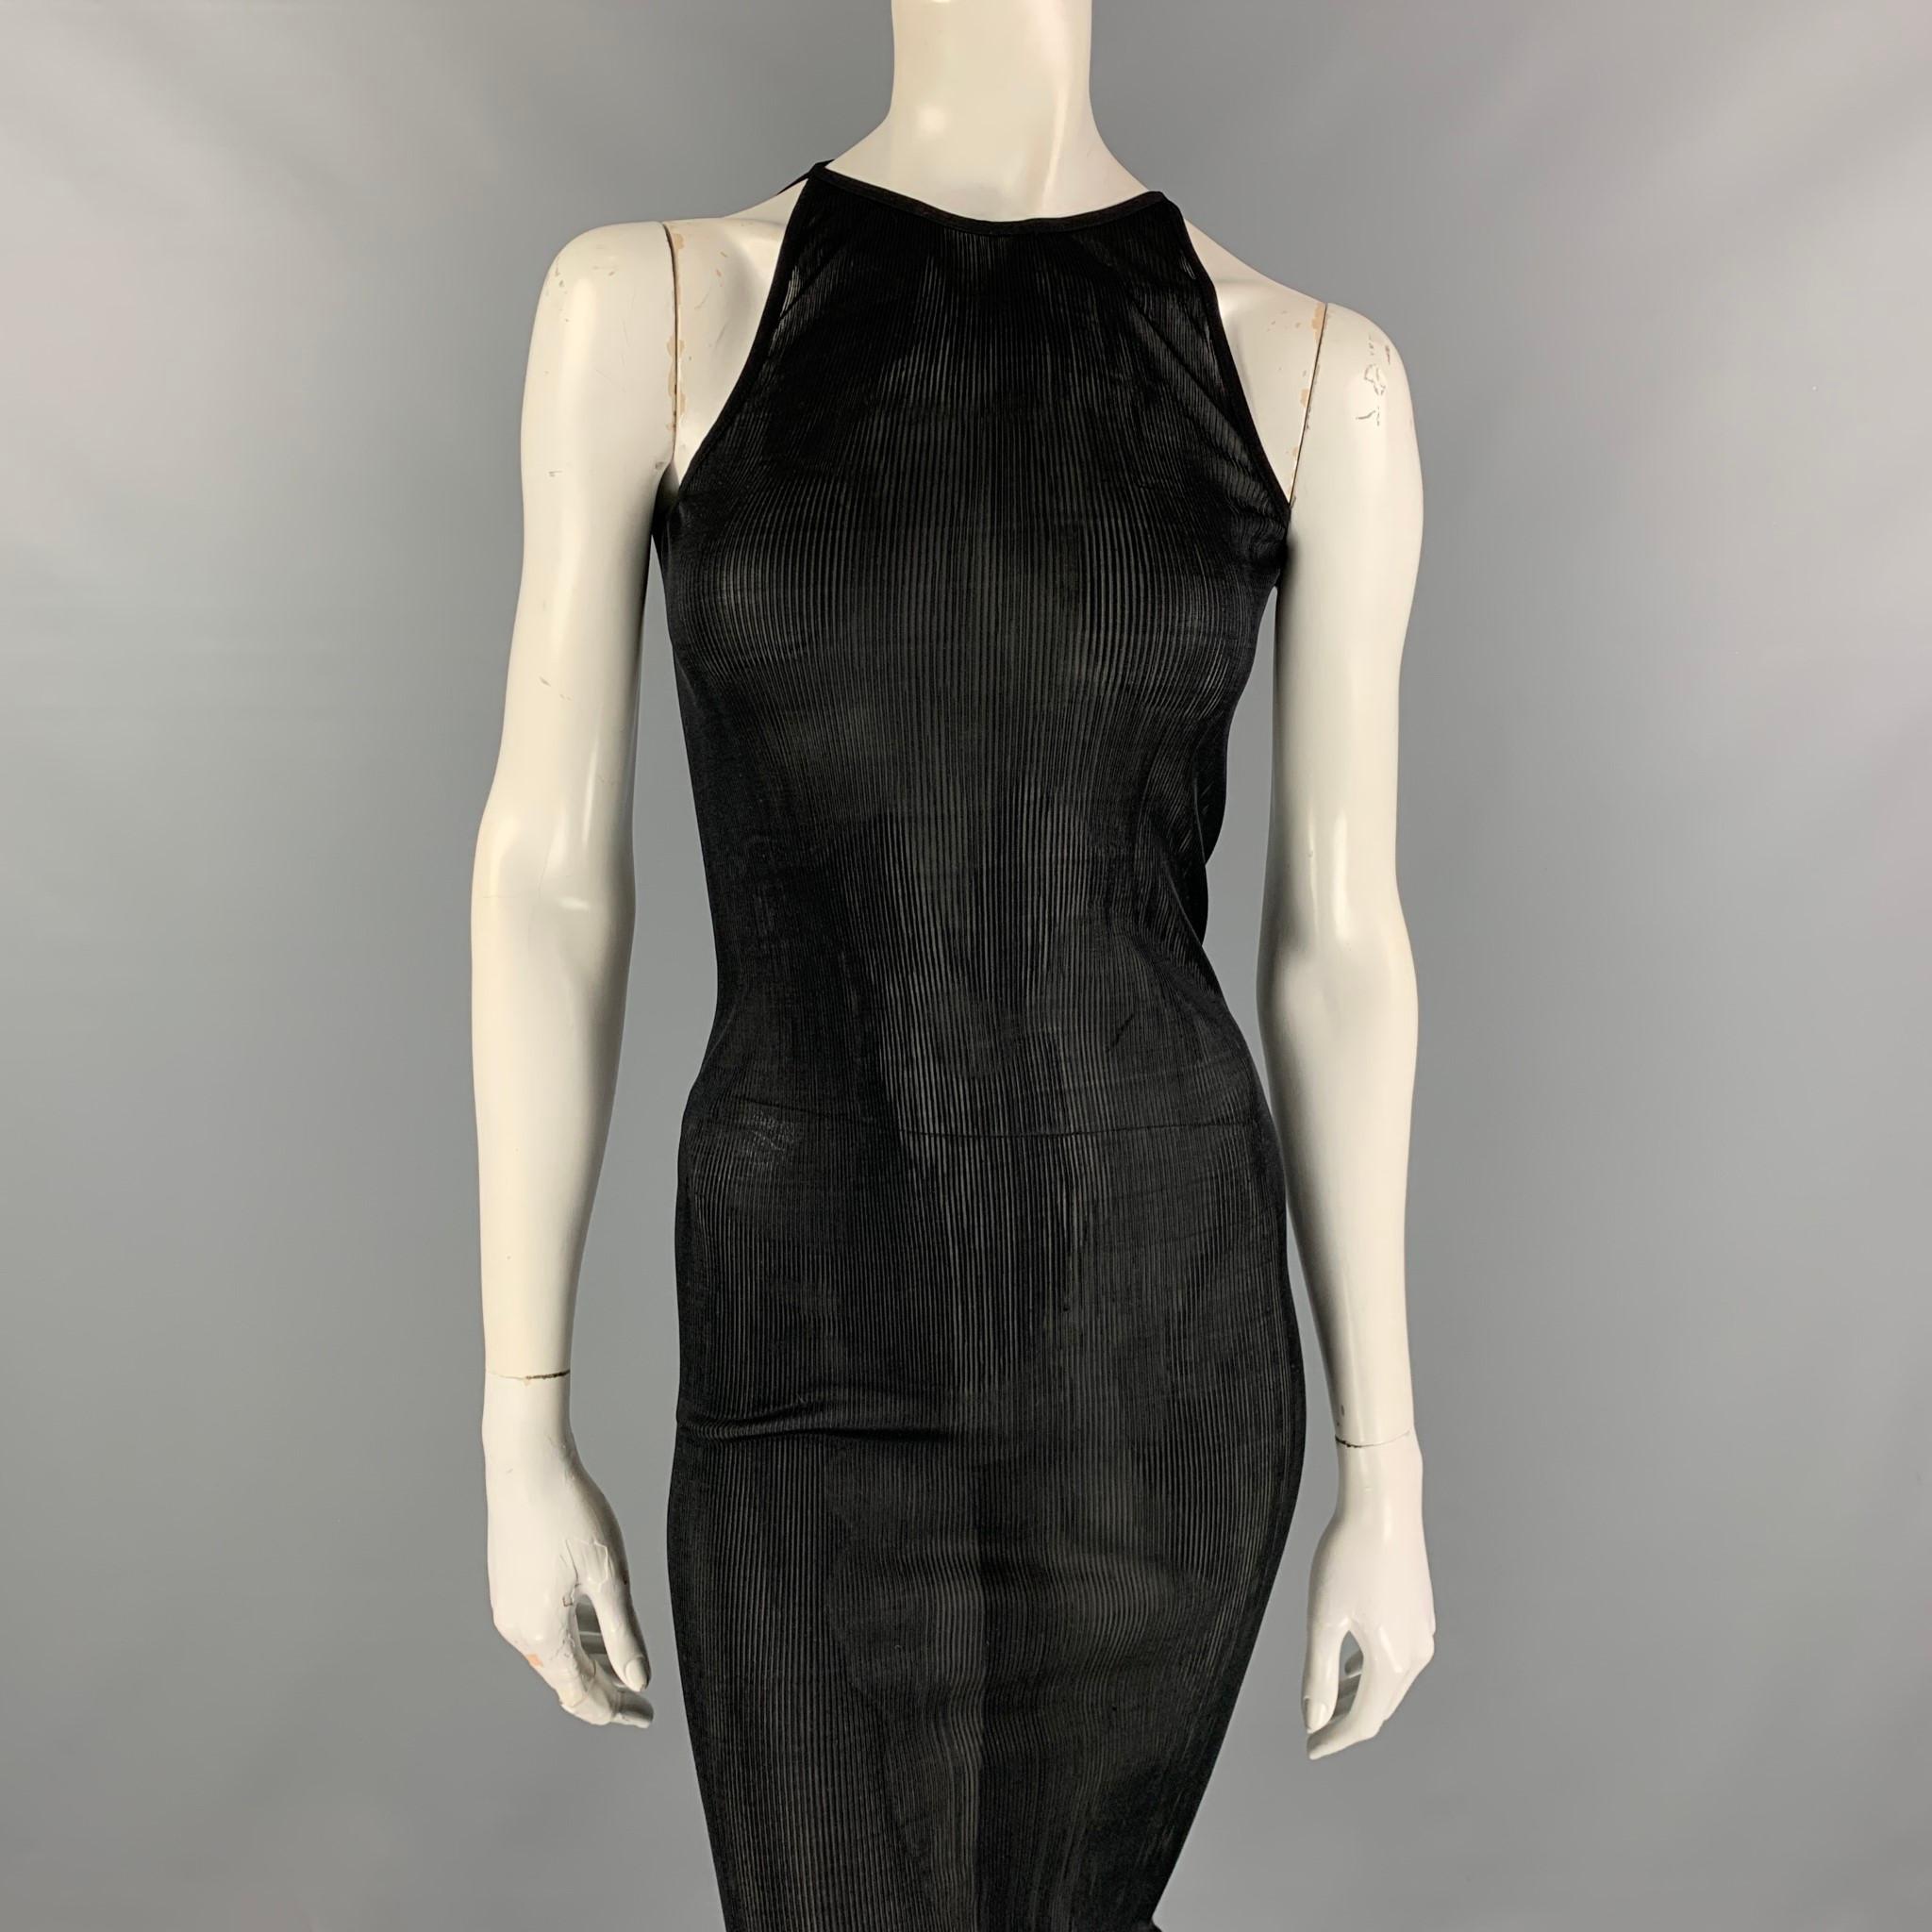 GIVENCHY maxi dress comes in a black sheer ribbed silk featuring a high neckline and a button-fastening keyhole at back. Comfortably fits those are between a size XS-M. who Made in Italy. 

New Without Tags. 
Marked: TU
Original Retail Price: